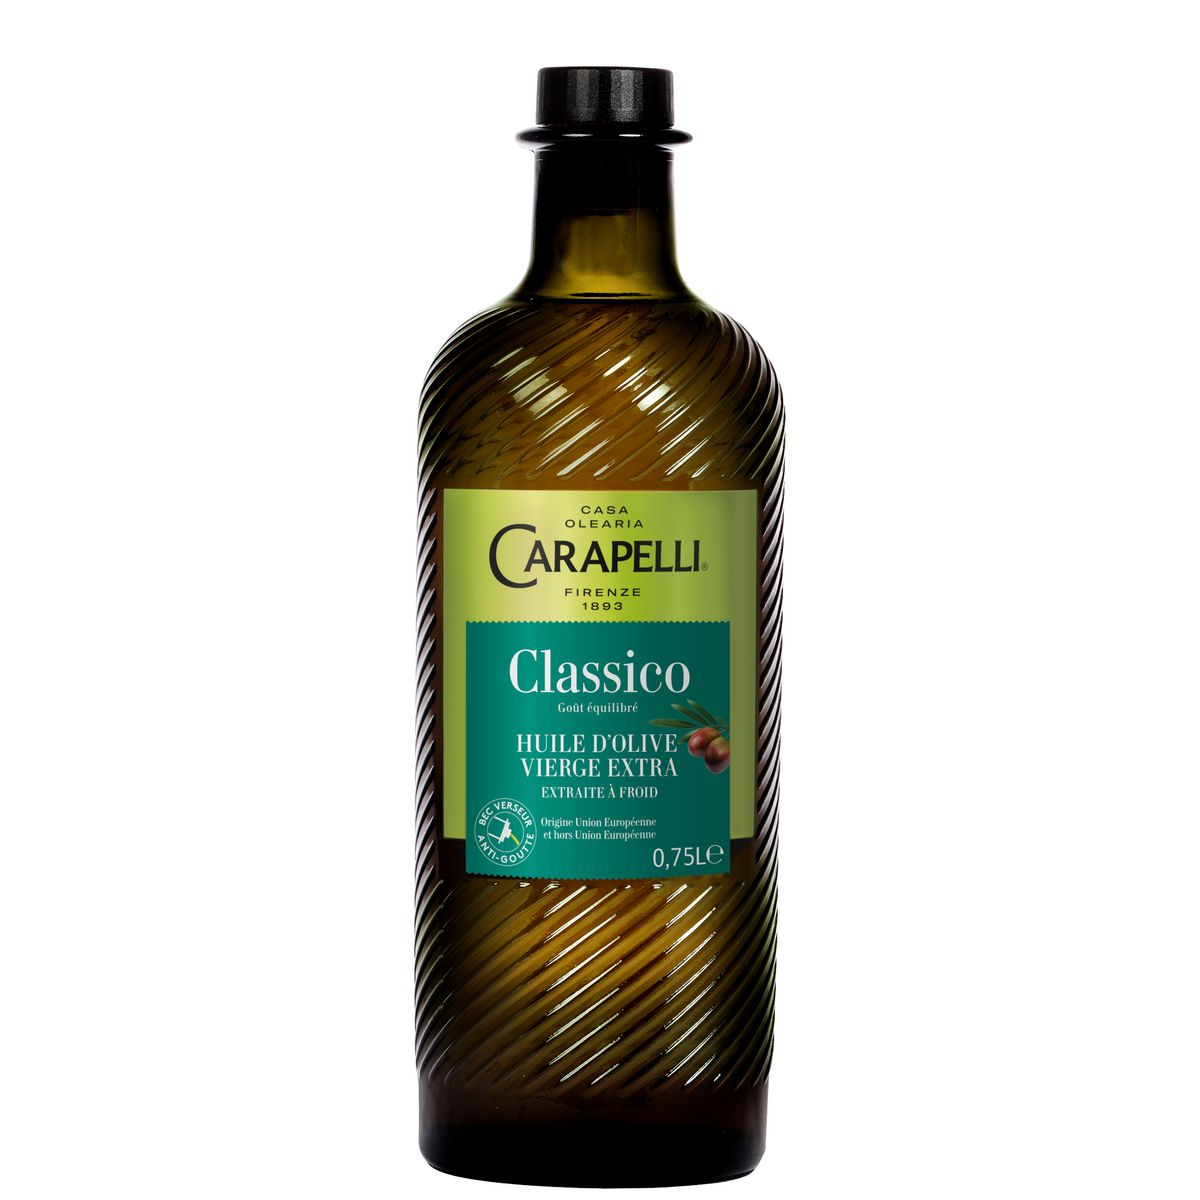 CARAPELLI Huile d'olive vierge extra Classico 75cl